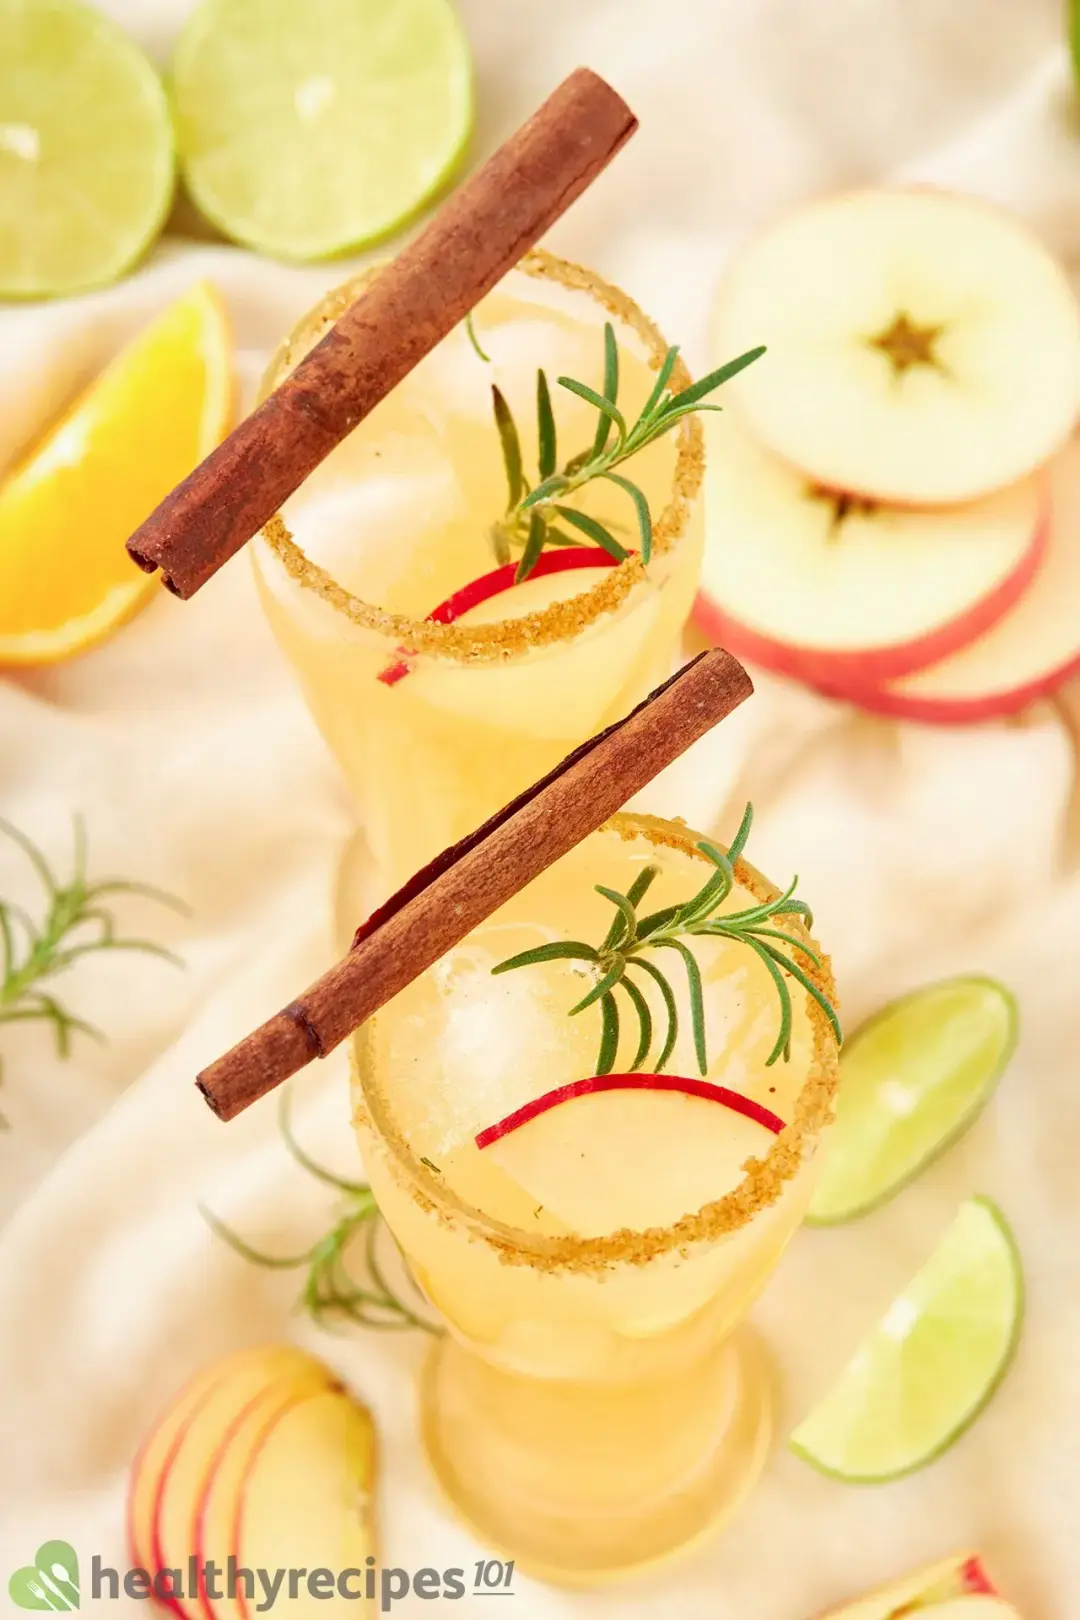 Two glasses of apple cider margarita cocktail garnished with cinnamon sticks, apple slices, lem on wedges, and rosemary sprigs